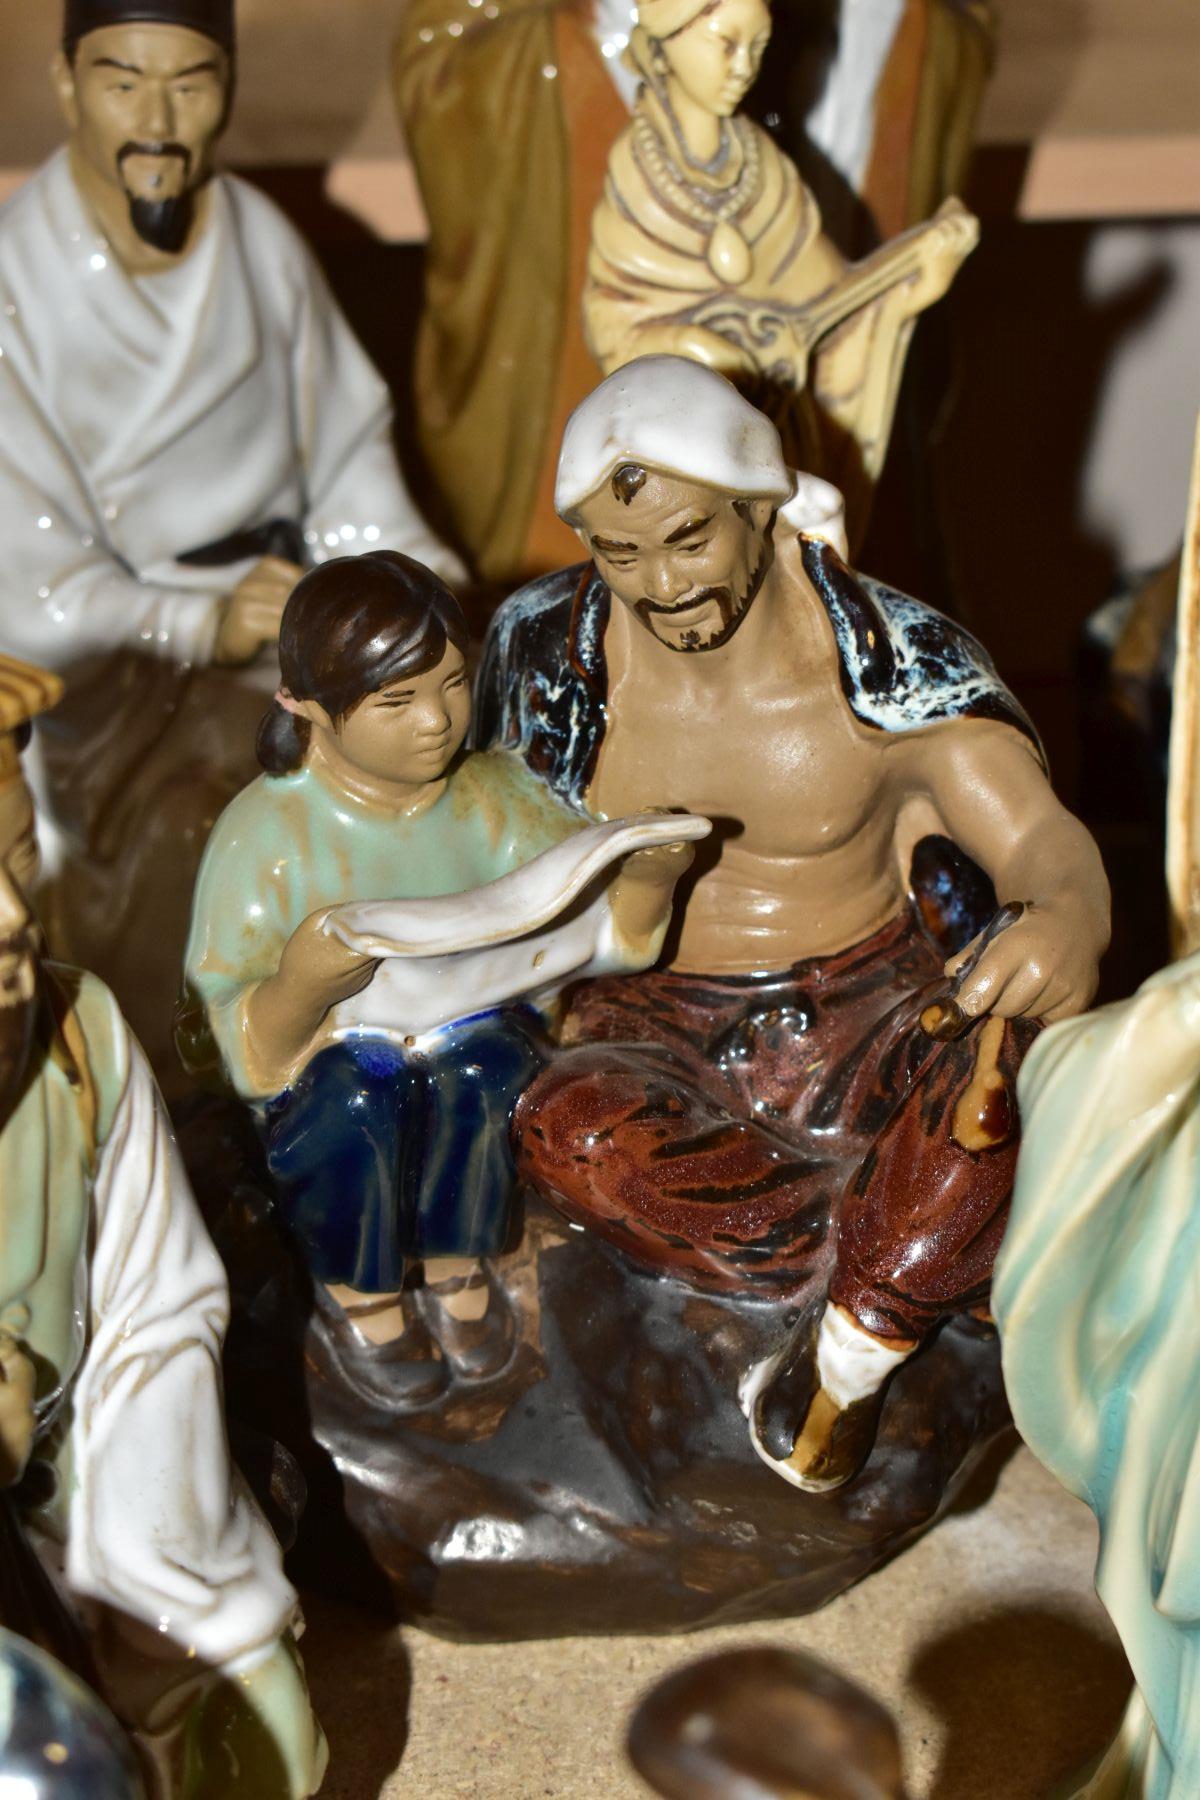 A GROUP OF MODERN ORIENTAL FIGURINES, to include fifteen figurines featuring people reading, fishing - Image 9 of 12